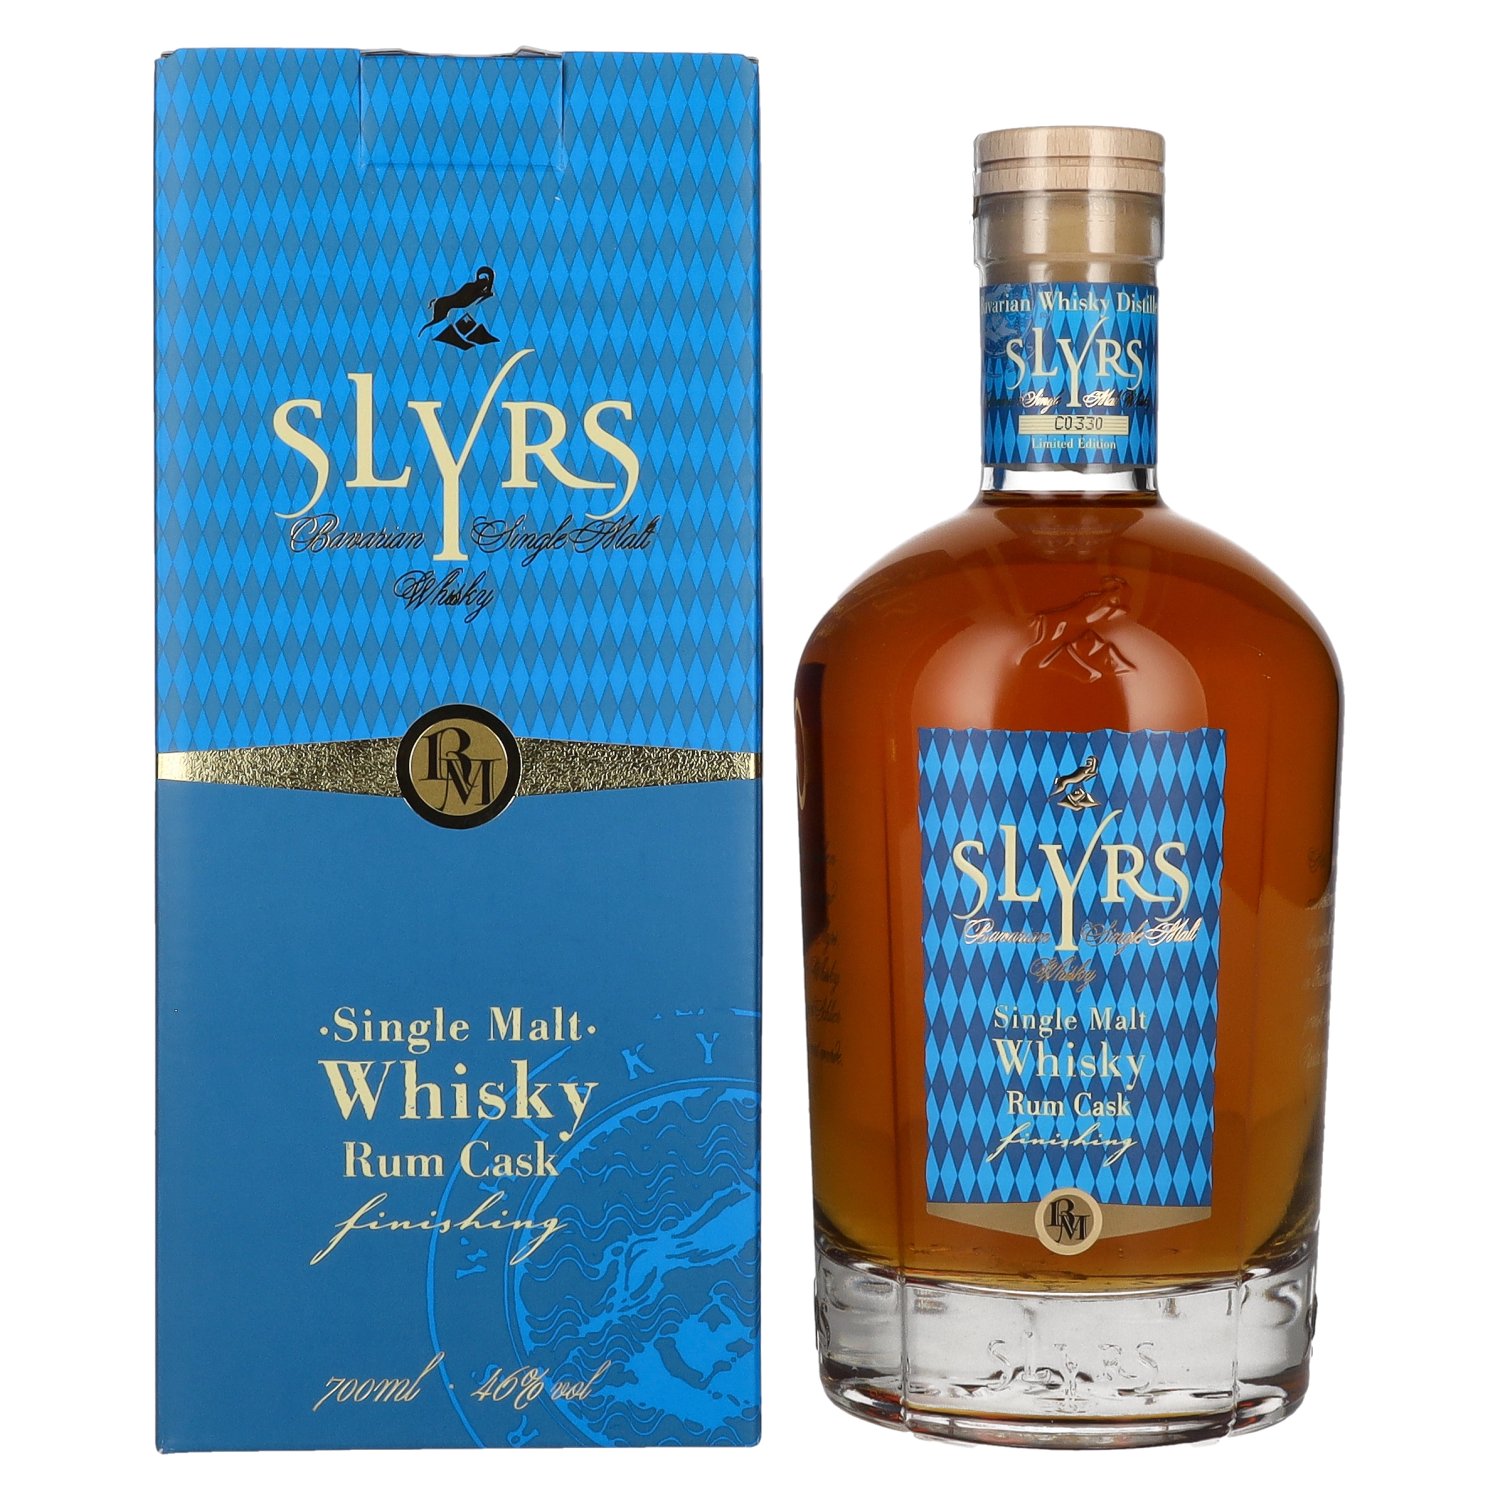 Slyrs RUM CASK FINISH in Whisky 0,7l Vol. 46% Malt Limited Edition Giftbox Single